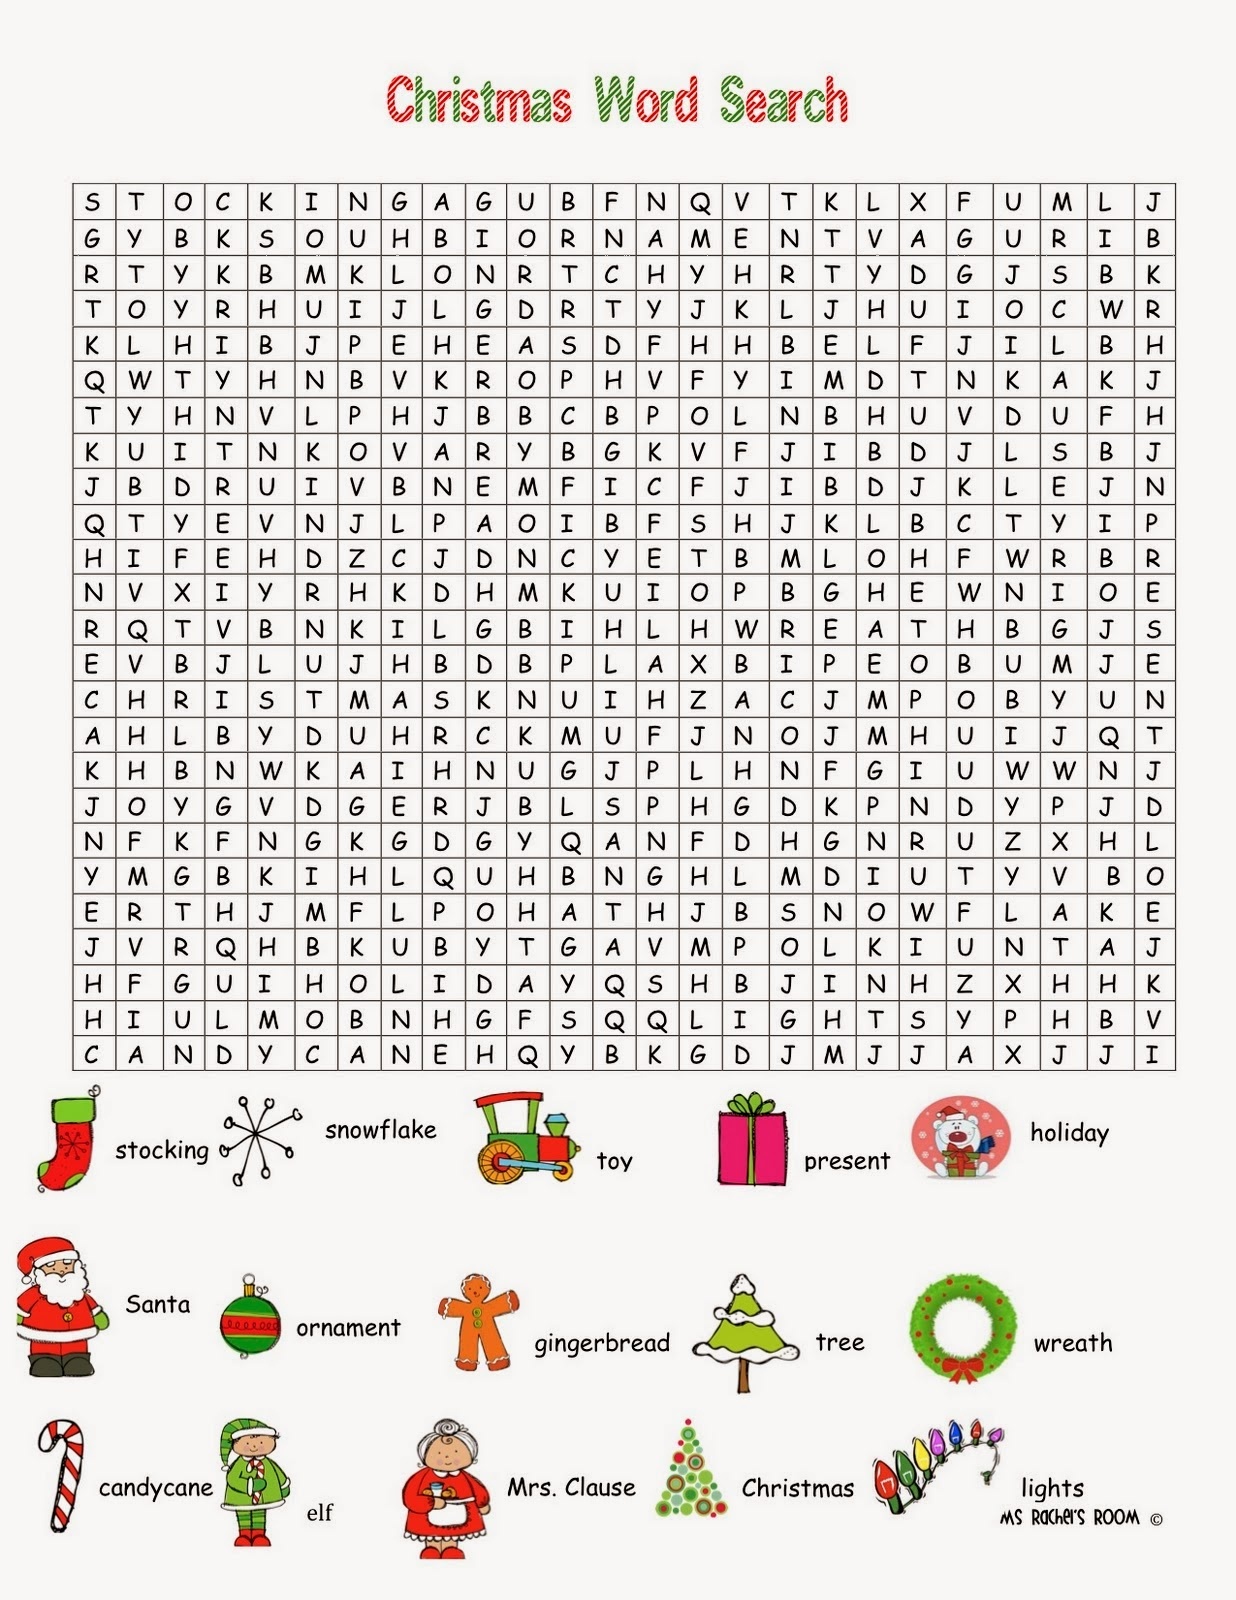 36 Printable Christmas Word Search Puzzles | Kittybabylove - Free Printable Christmas Puzzles Word Searches